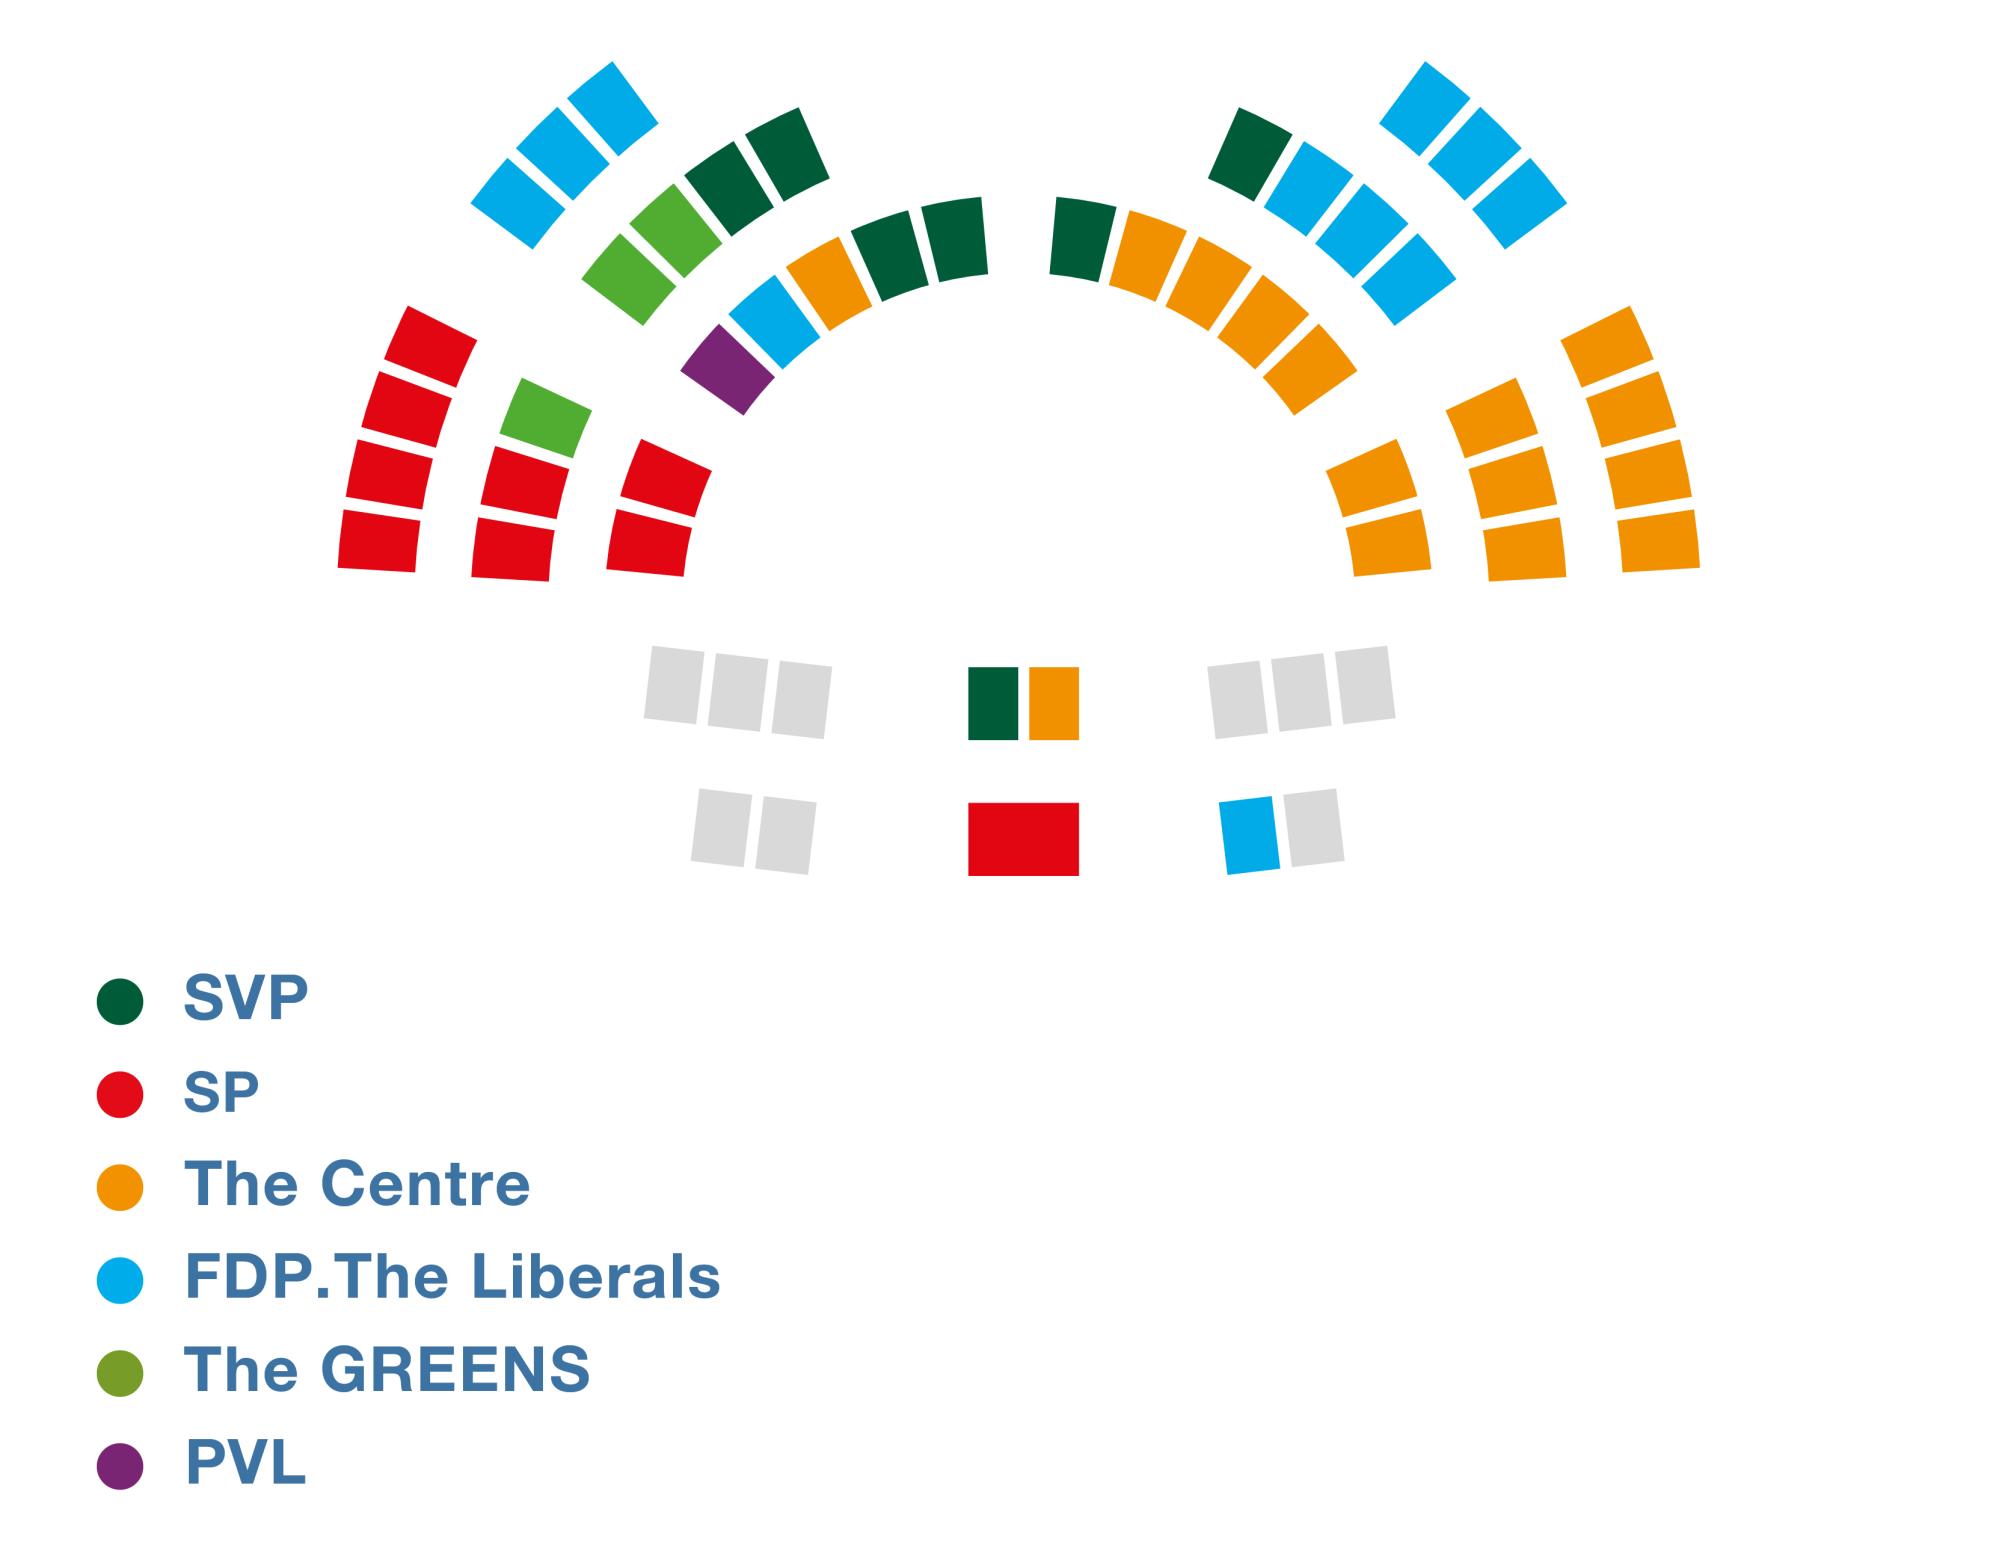 Another diagram shows how the 46 seats of the Council of States are allocated among the five parliamentary groups.